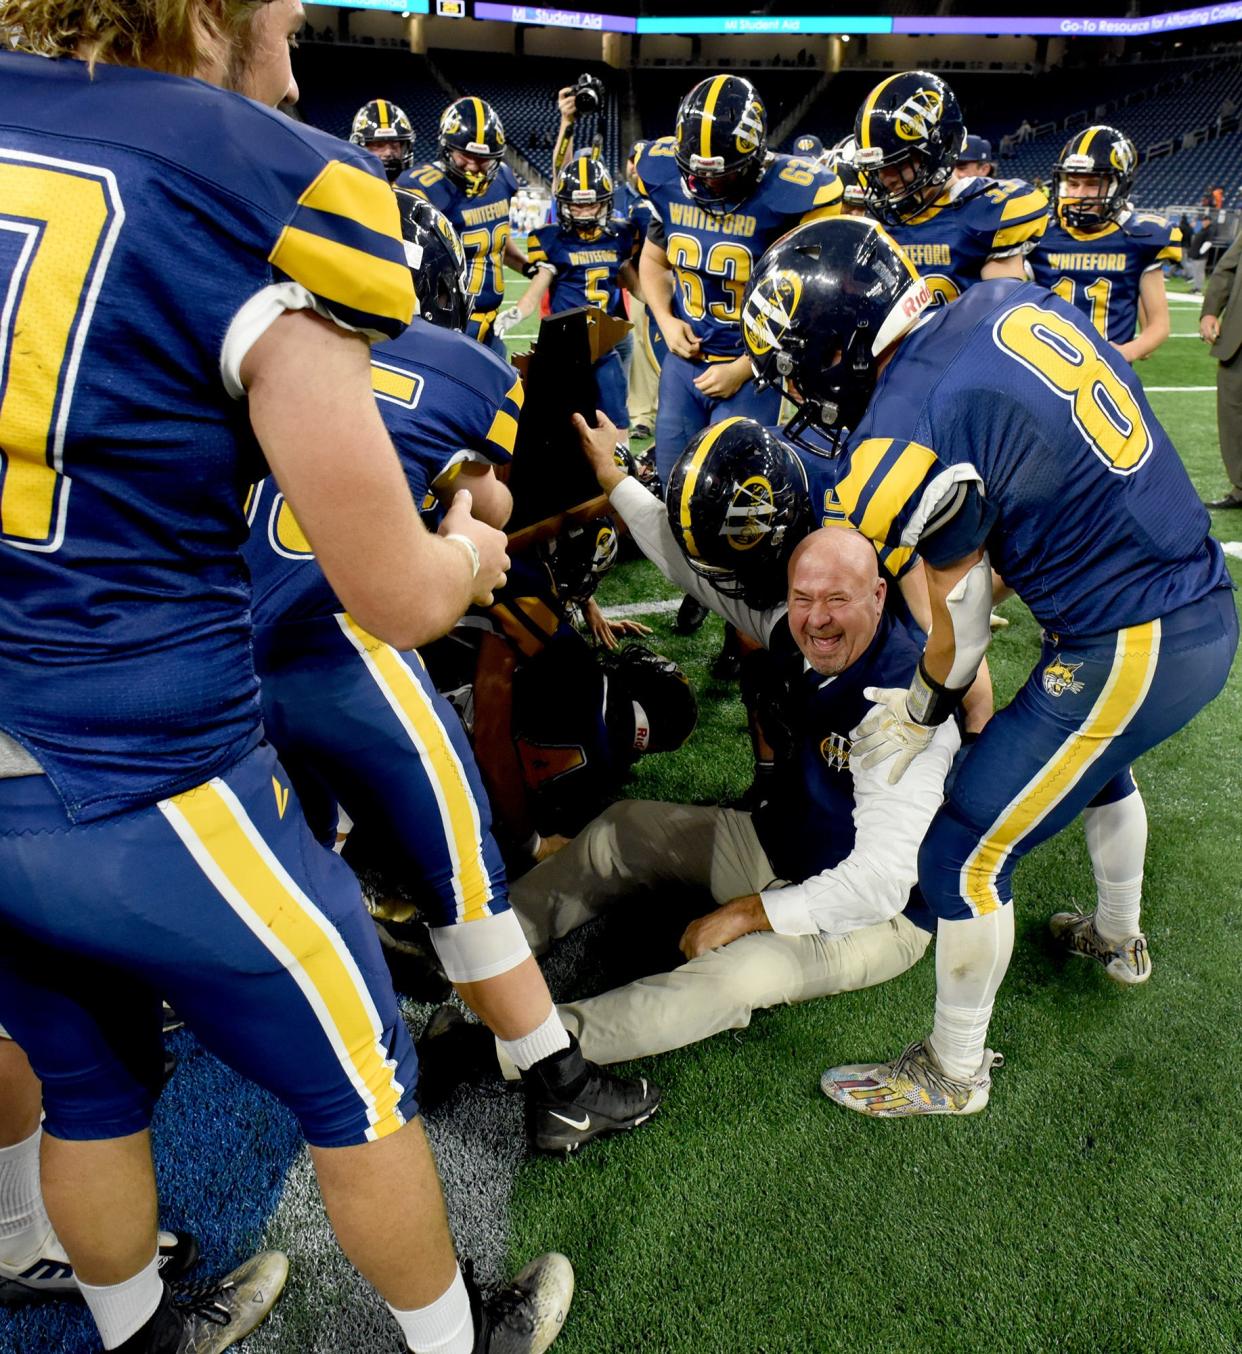 Ottawa Lake Whiteford head coach Todd Thieken laughs while he raises the Division 8 State Championship trophy after falling down win his players knocked him over. Whiteford beat Ubly 26-20 last year.